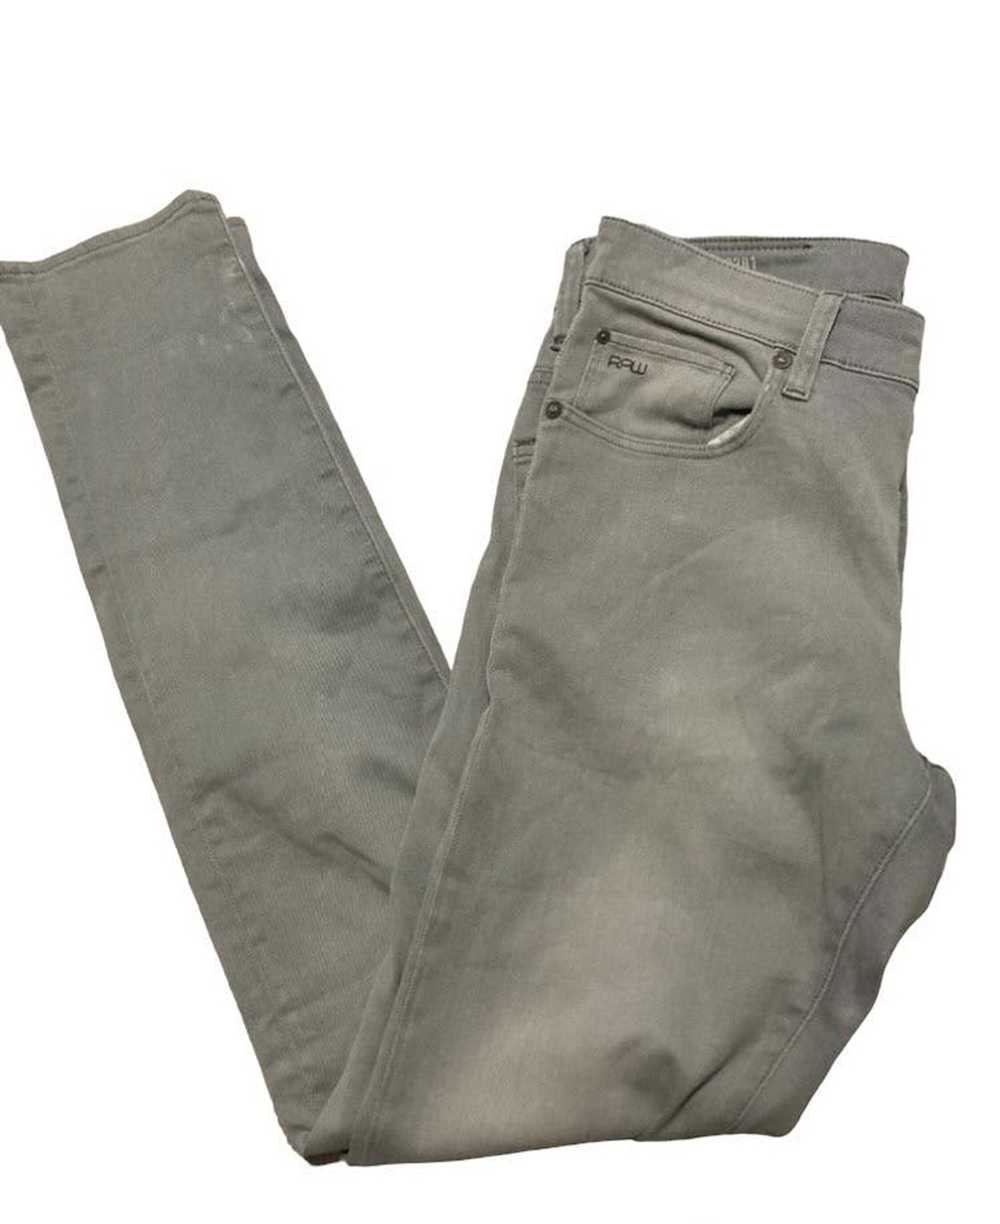 G Star Raw Authentic G-STAR RAW Jeans - image 1